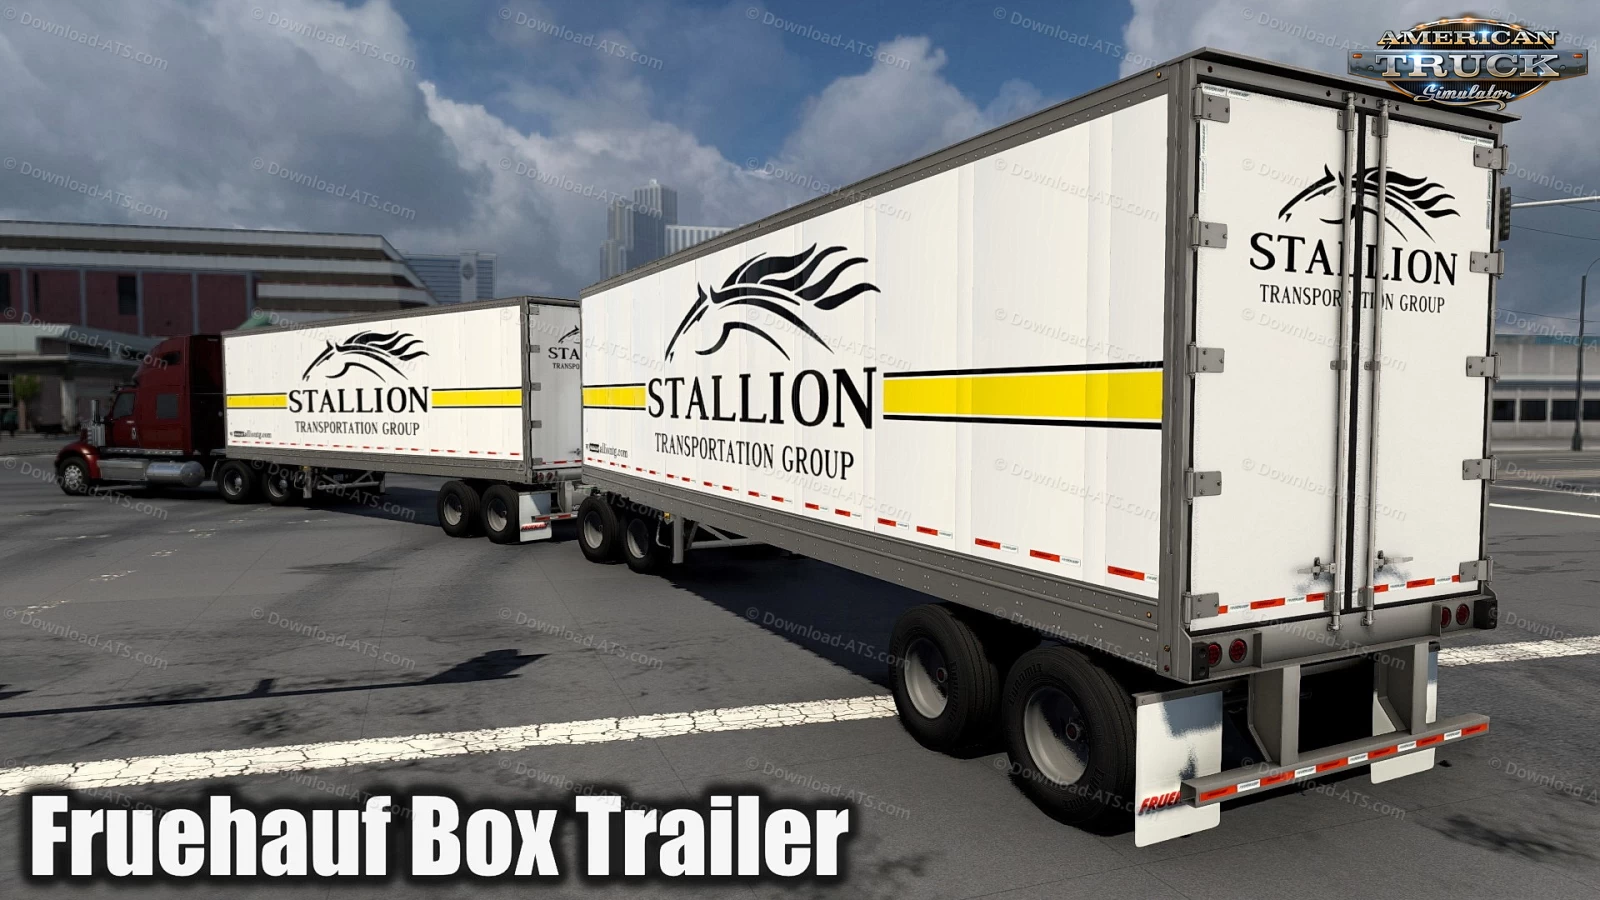 The Fruehauf Box Trailer Ownable v1.5 (1.45.x) for ATS